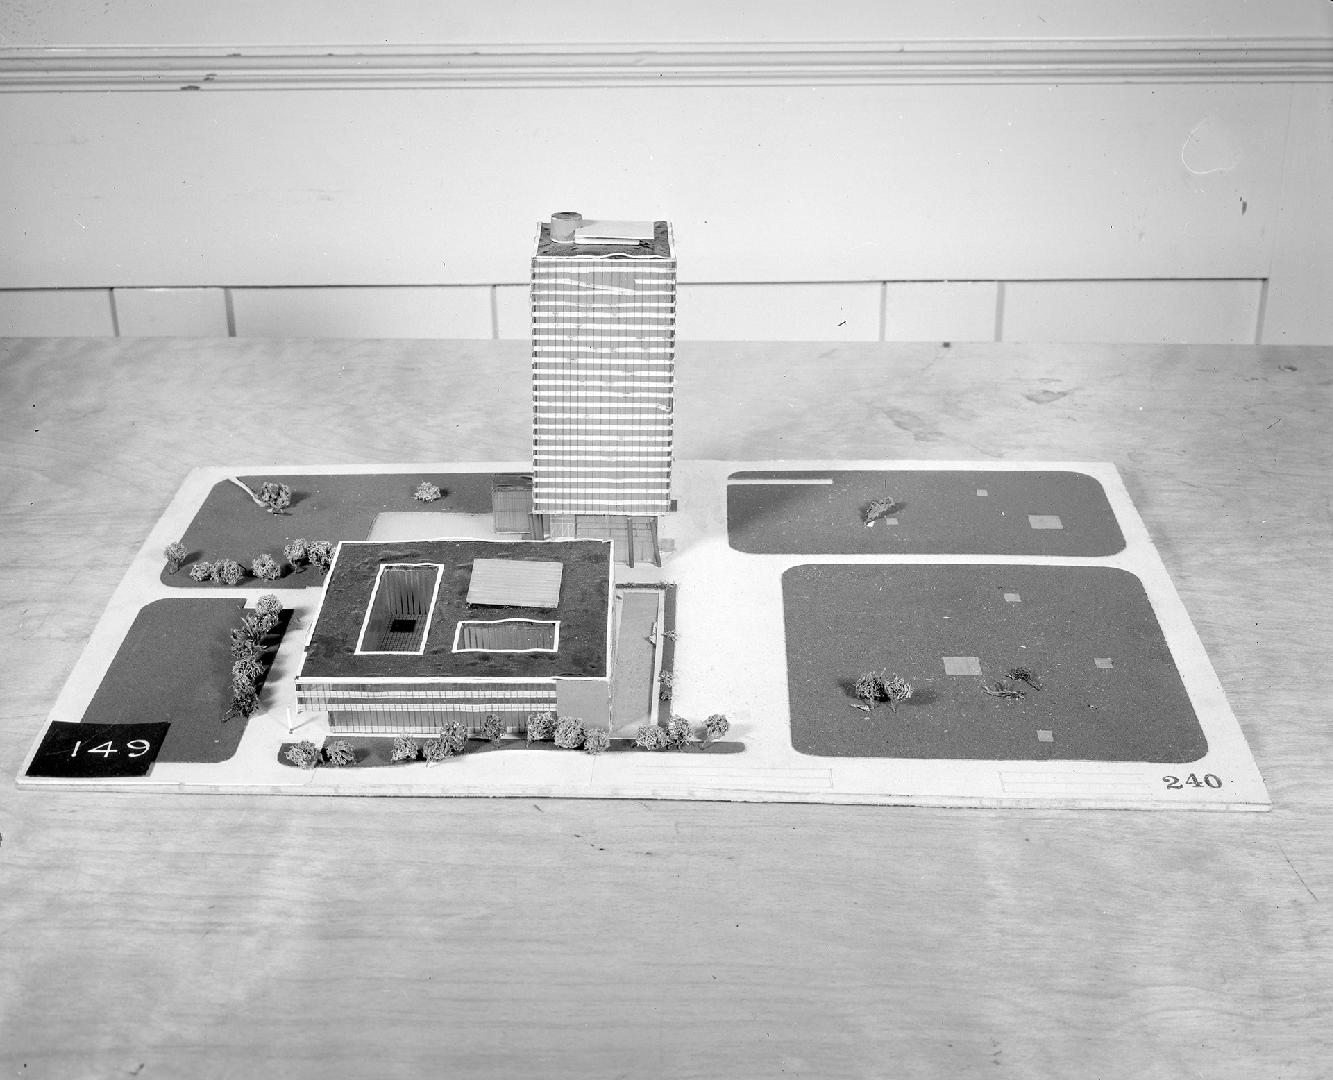 Mihai Enescu entry, City Hall and Square Competition, Toronto, 1958, architectural model